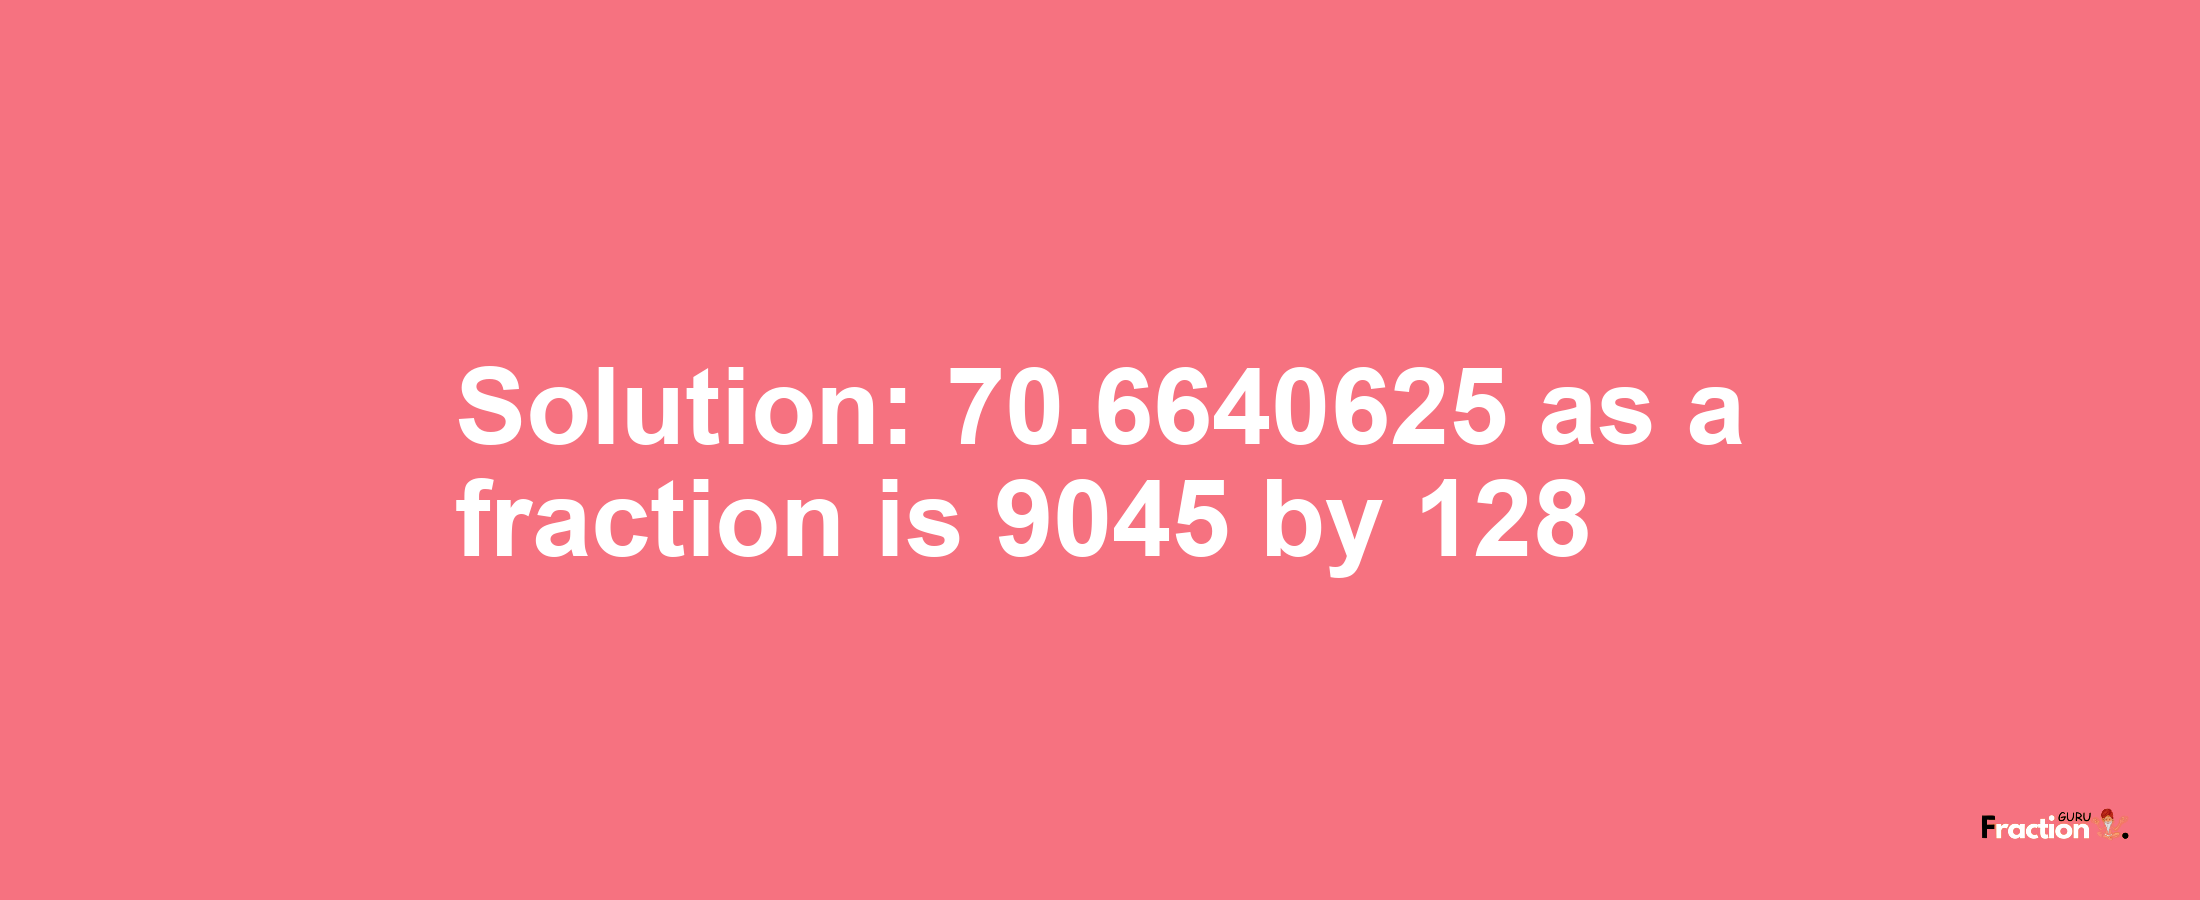 Solution:70.6640625 as a fraction is 9045/128